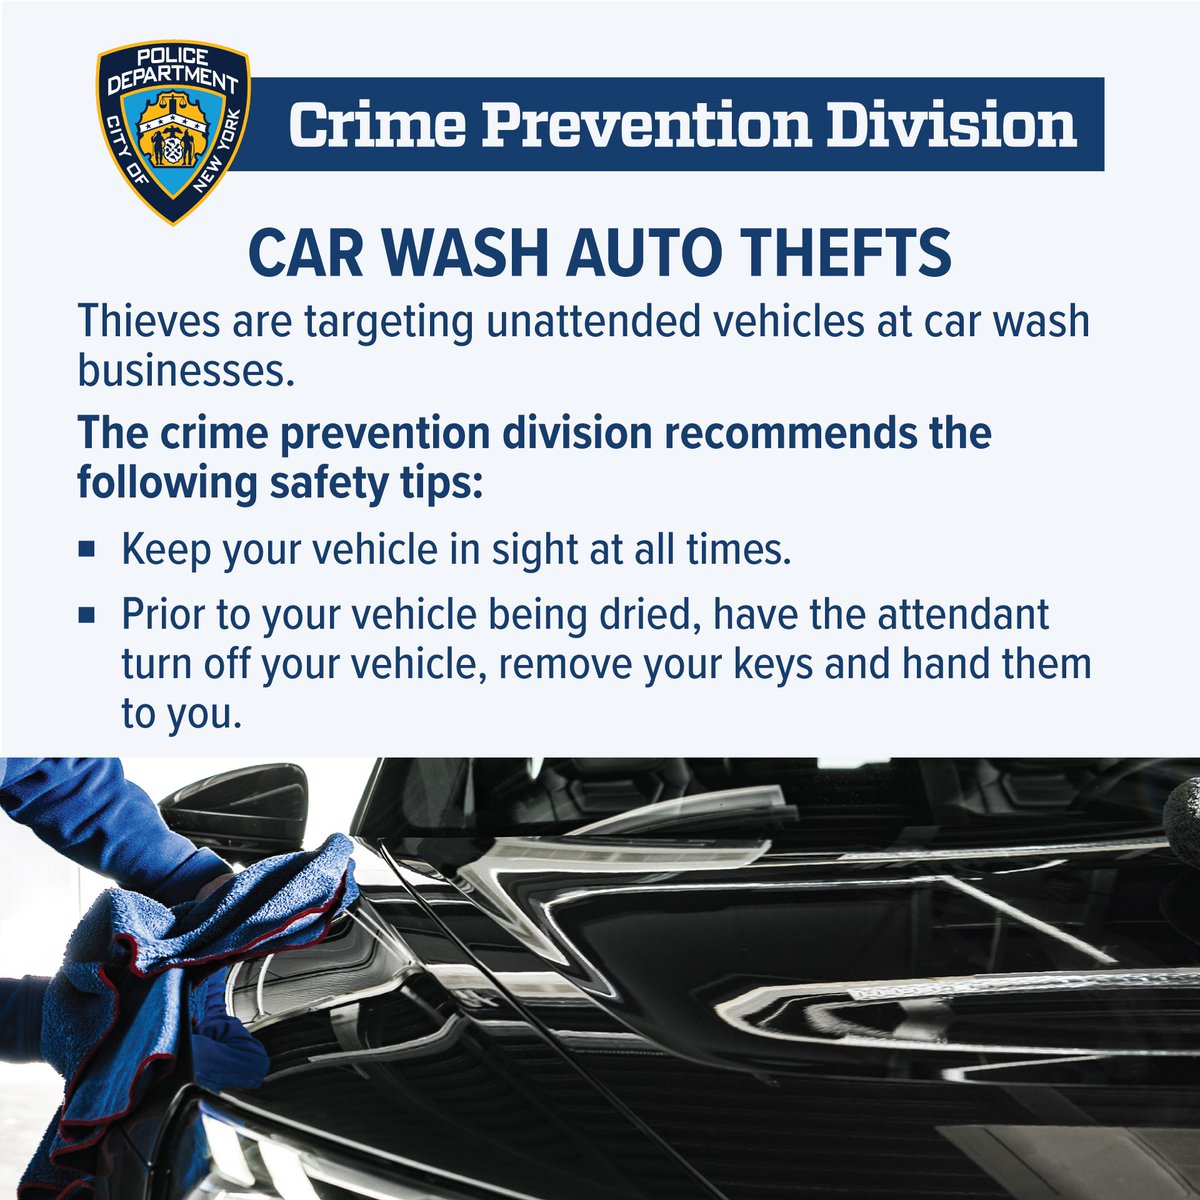 ⚠️Thieves are targeting unattended vehicles at car wash businesses. Follow these tips to avoid becoming a victim: ➡️Keep your vehicles in sight at all times. ➡️Before drying your vehicle, have an attendant turn off the car and hand you the keys.